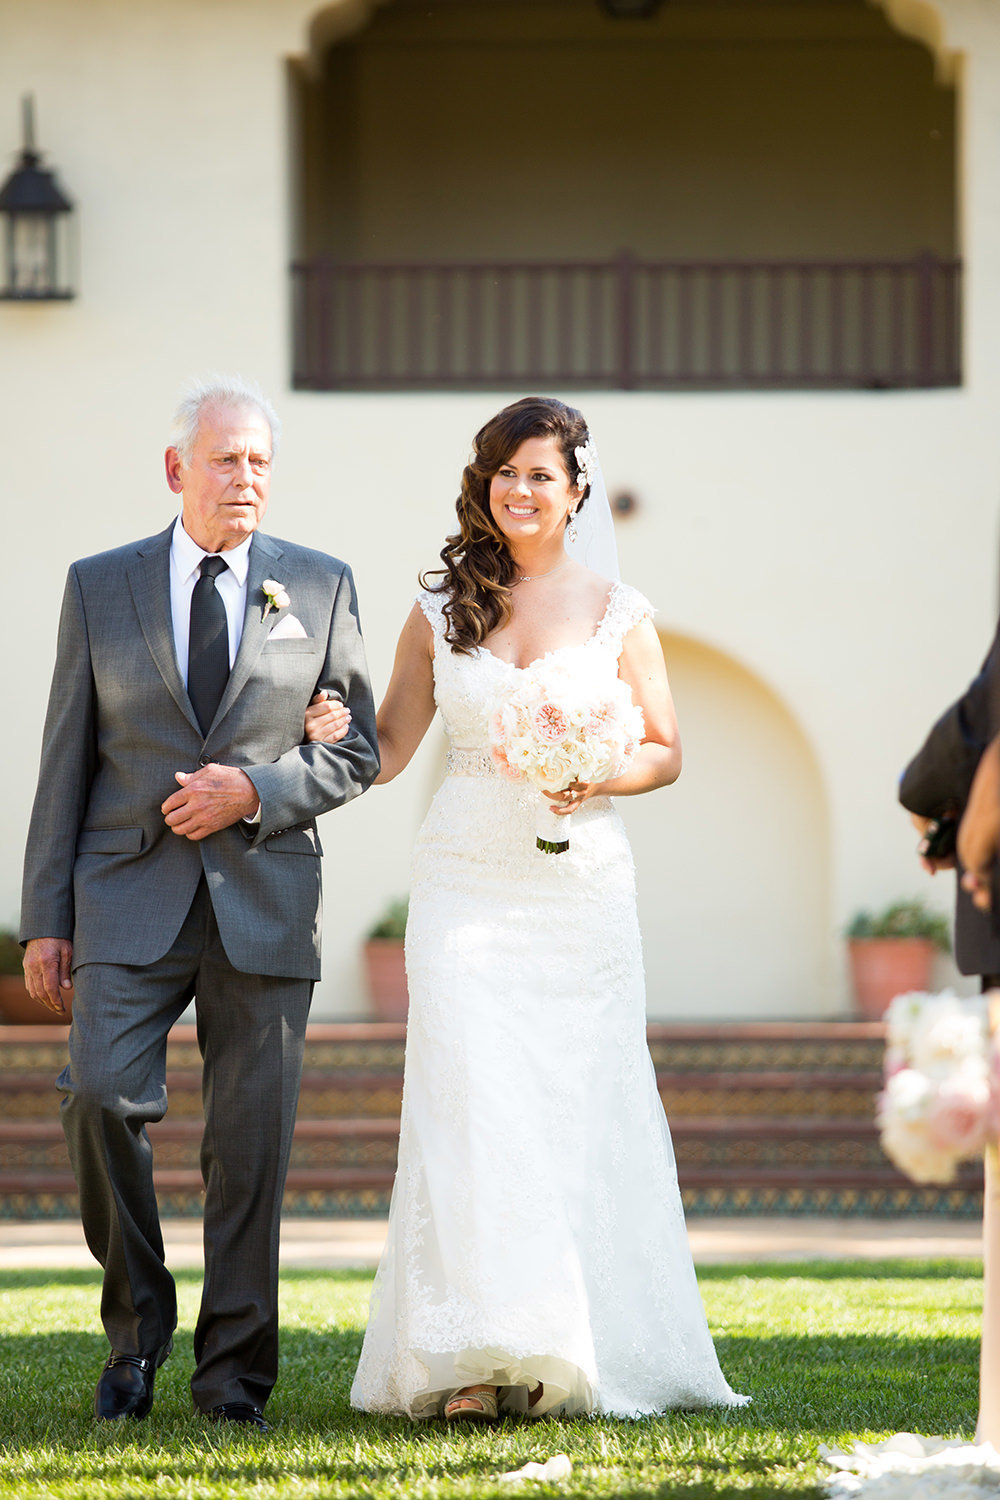 A bride and her father walk the aisle